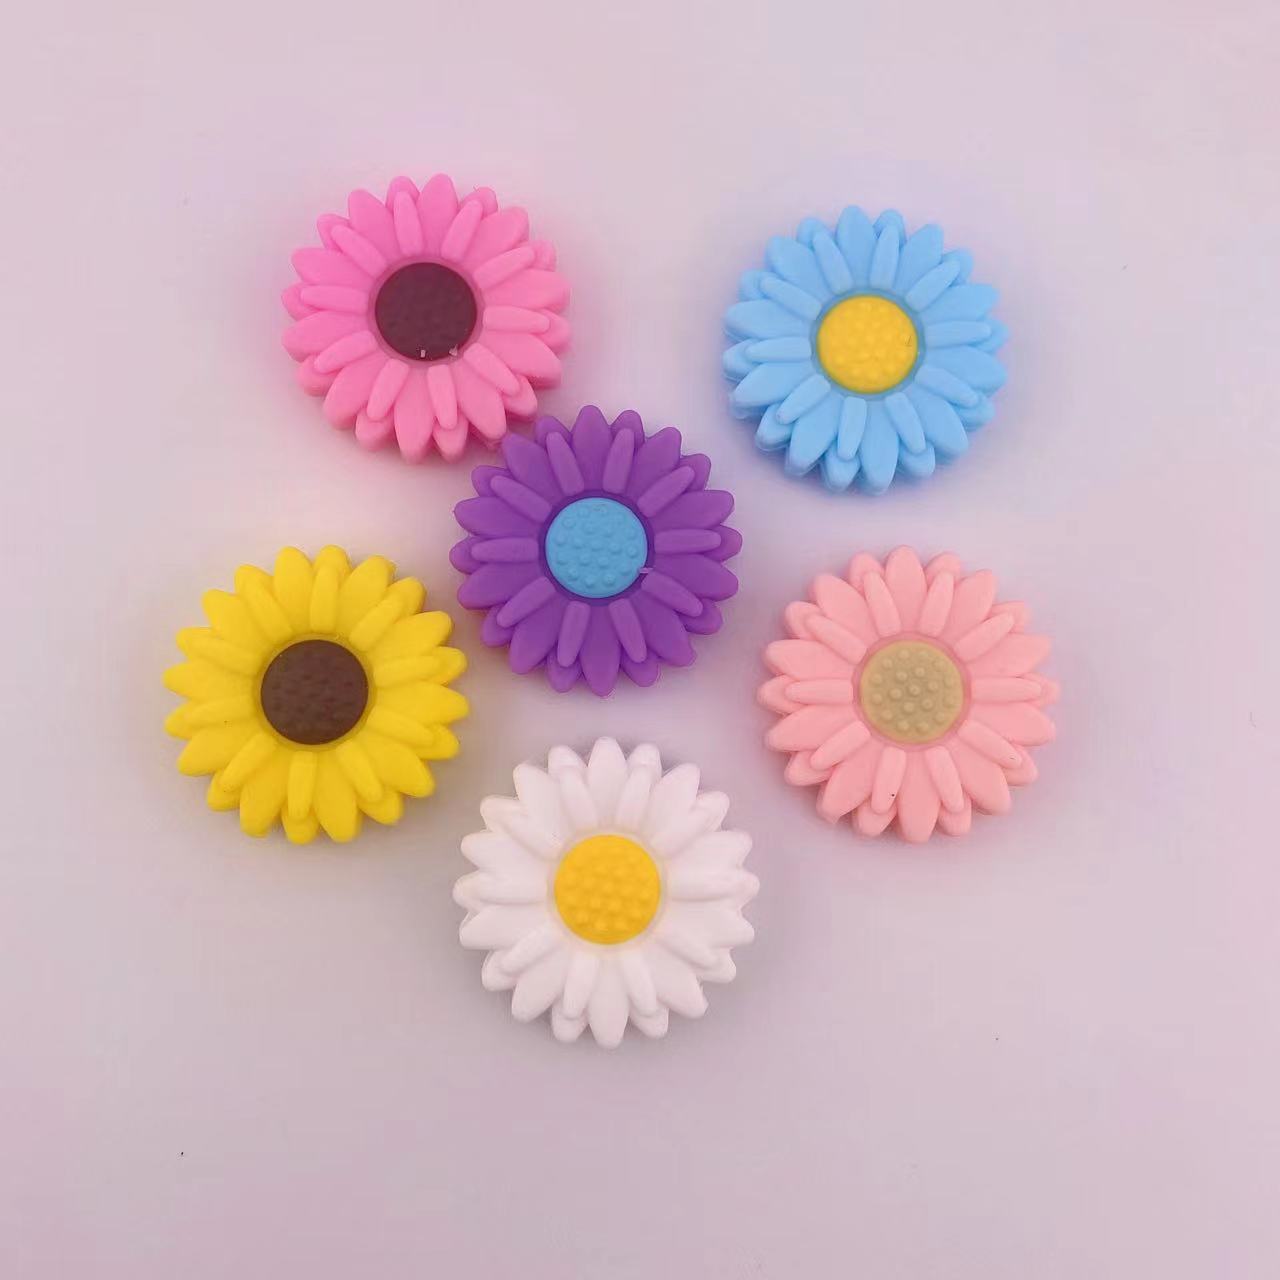 20 Pieces 30 MM Random Mixed Color Daisy Follower Silicone Focal Beads